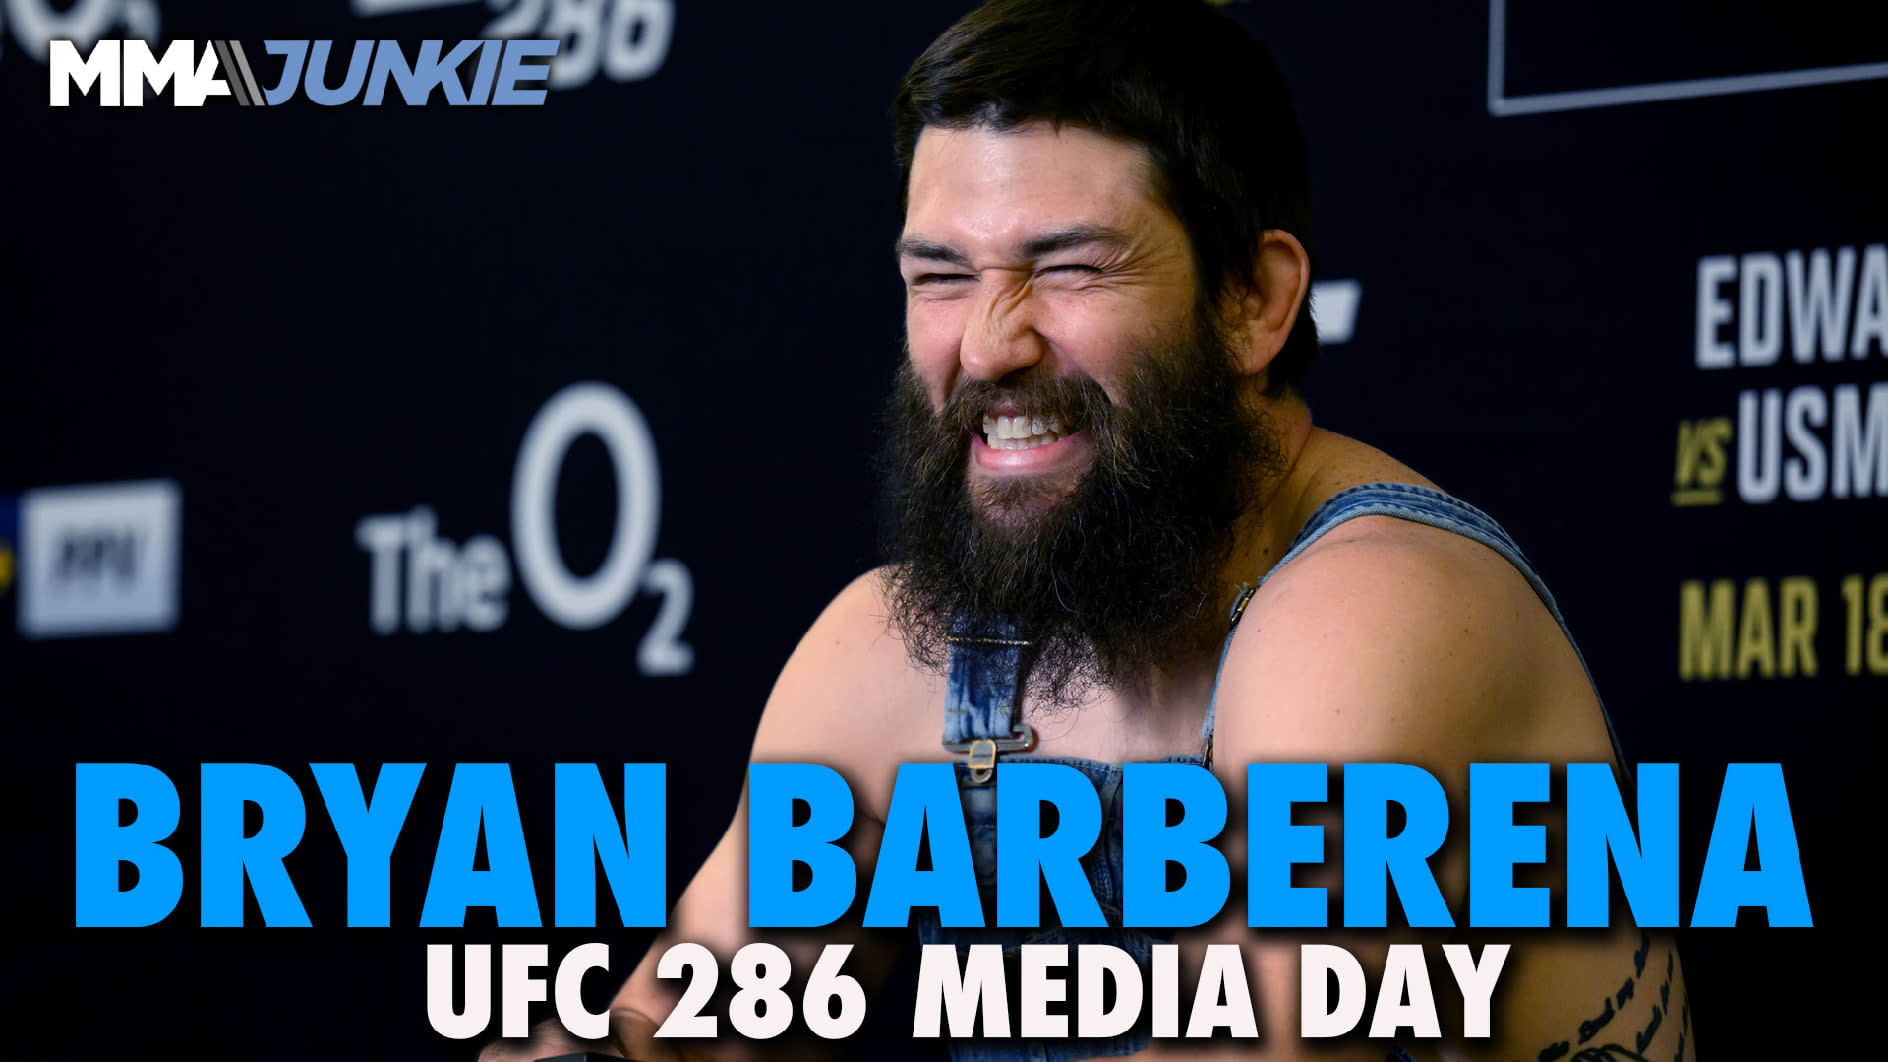 Bryan Barberena explains why UFC 286 fight with legend Gunnar Nelson a big deal